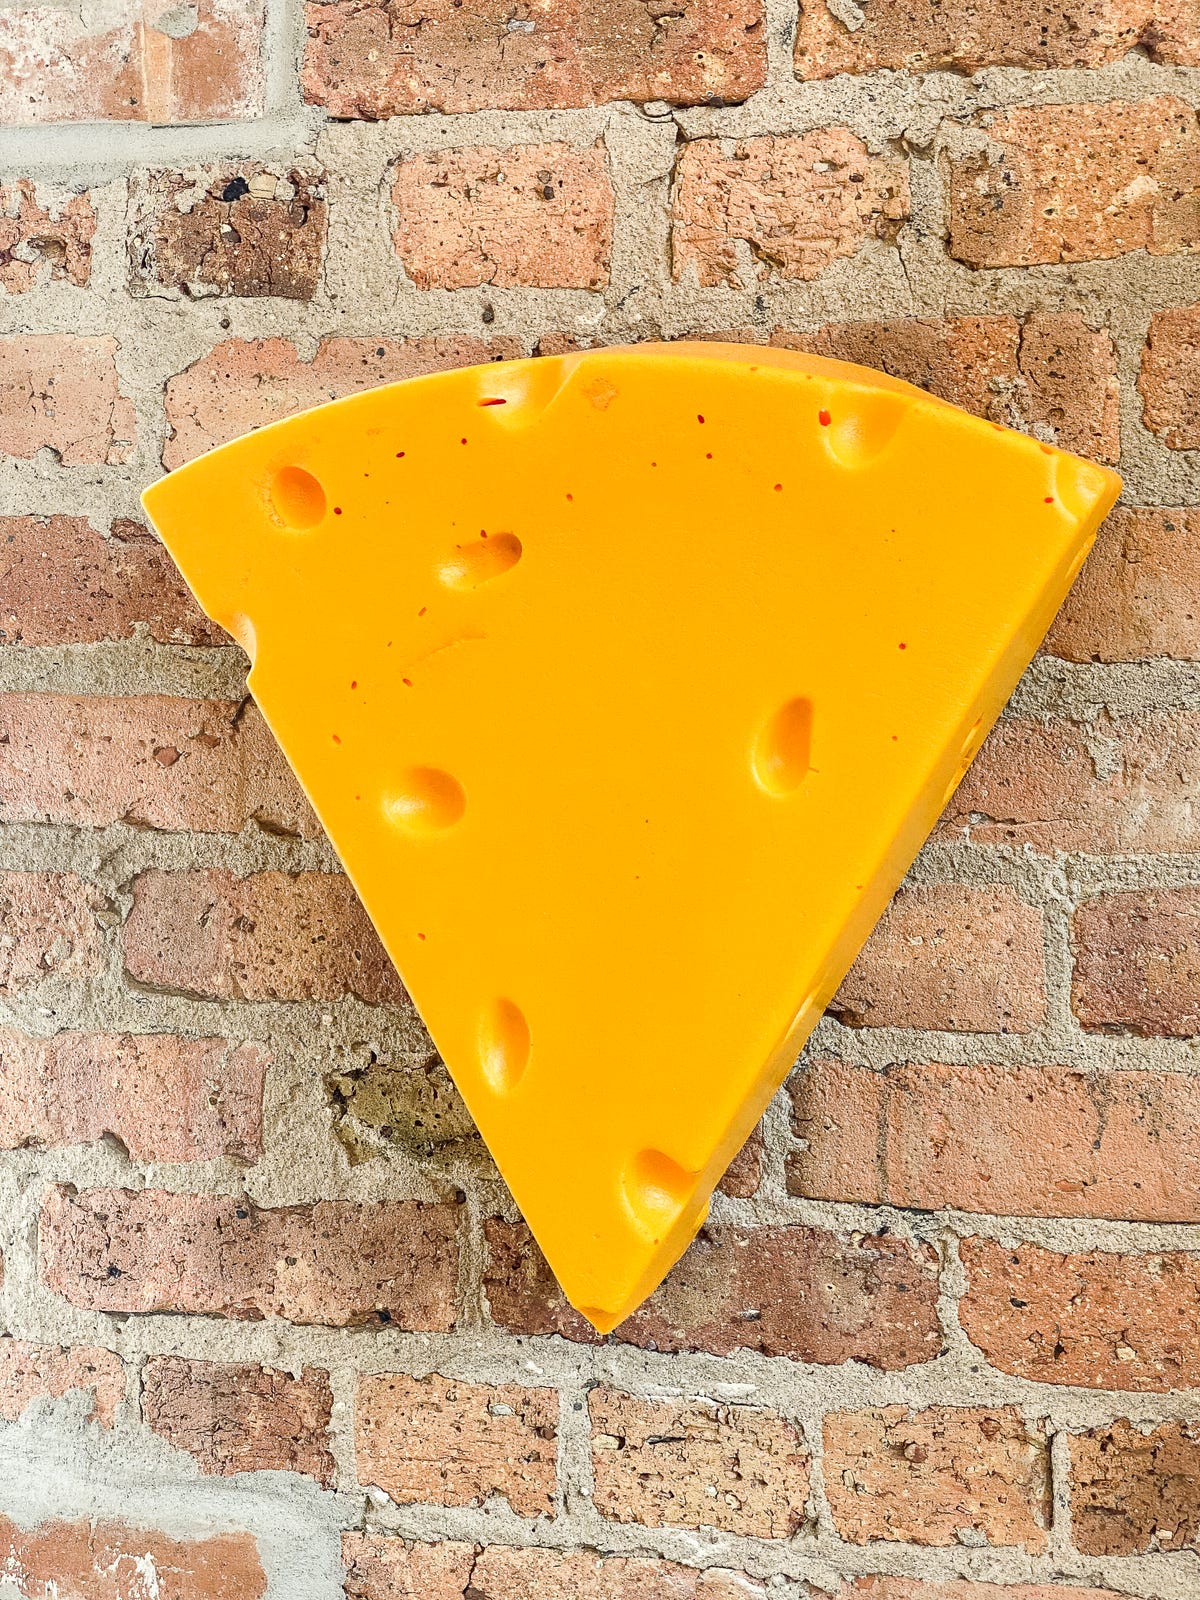 cheesehead-foamation-factory-made-in-america-2021-wisconsin-cnet-107